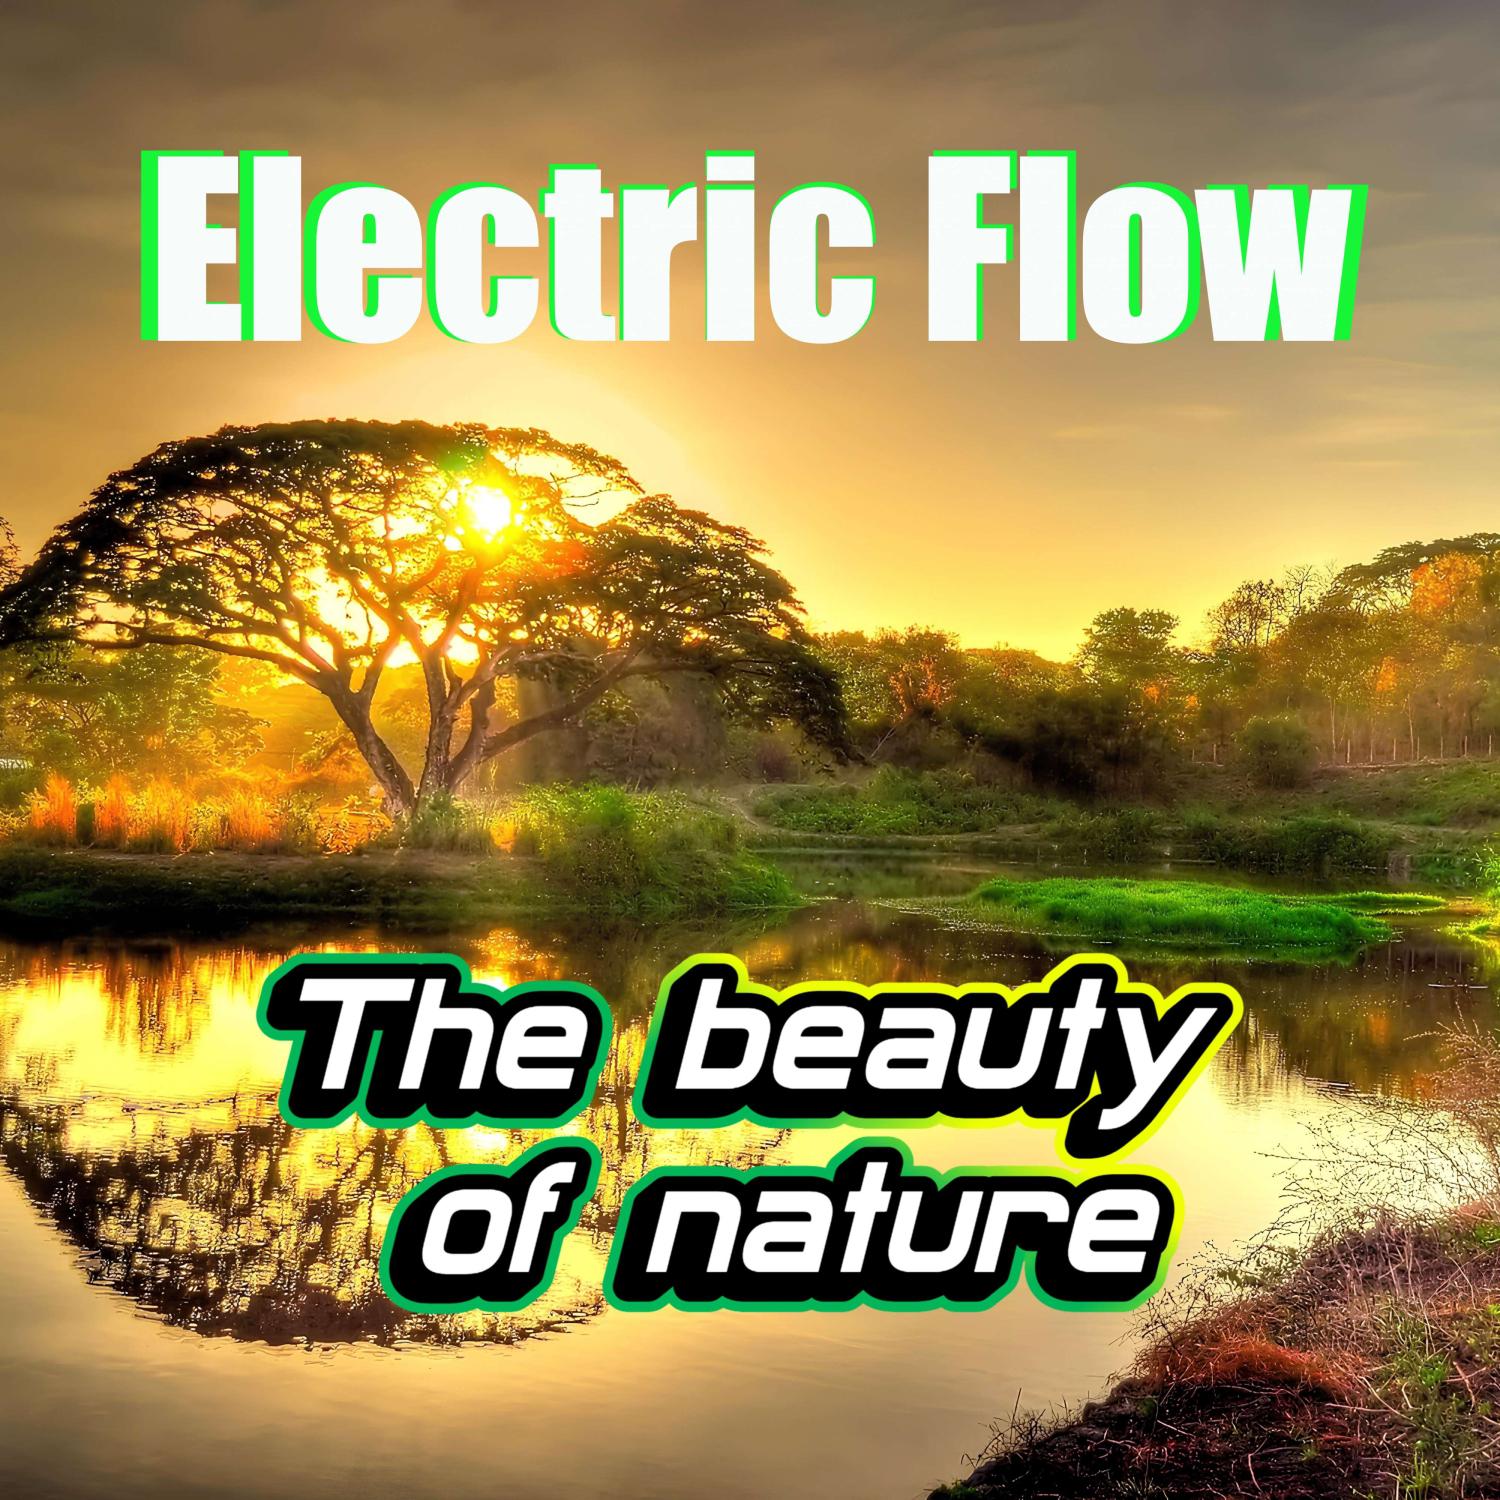 Electric Flow - The beauty of nature